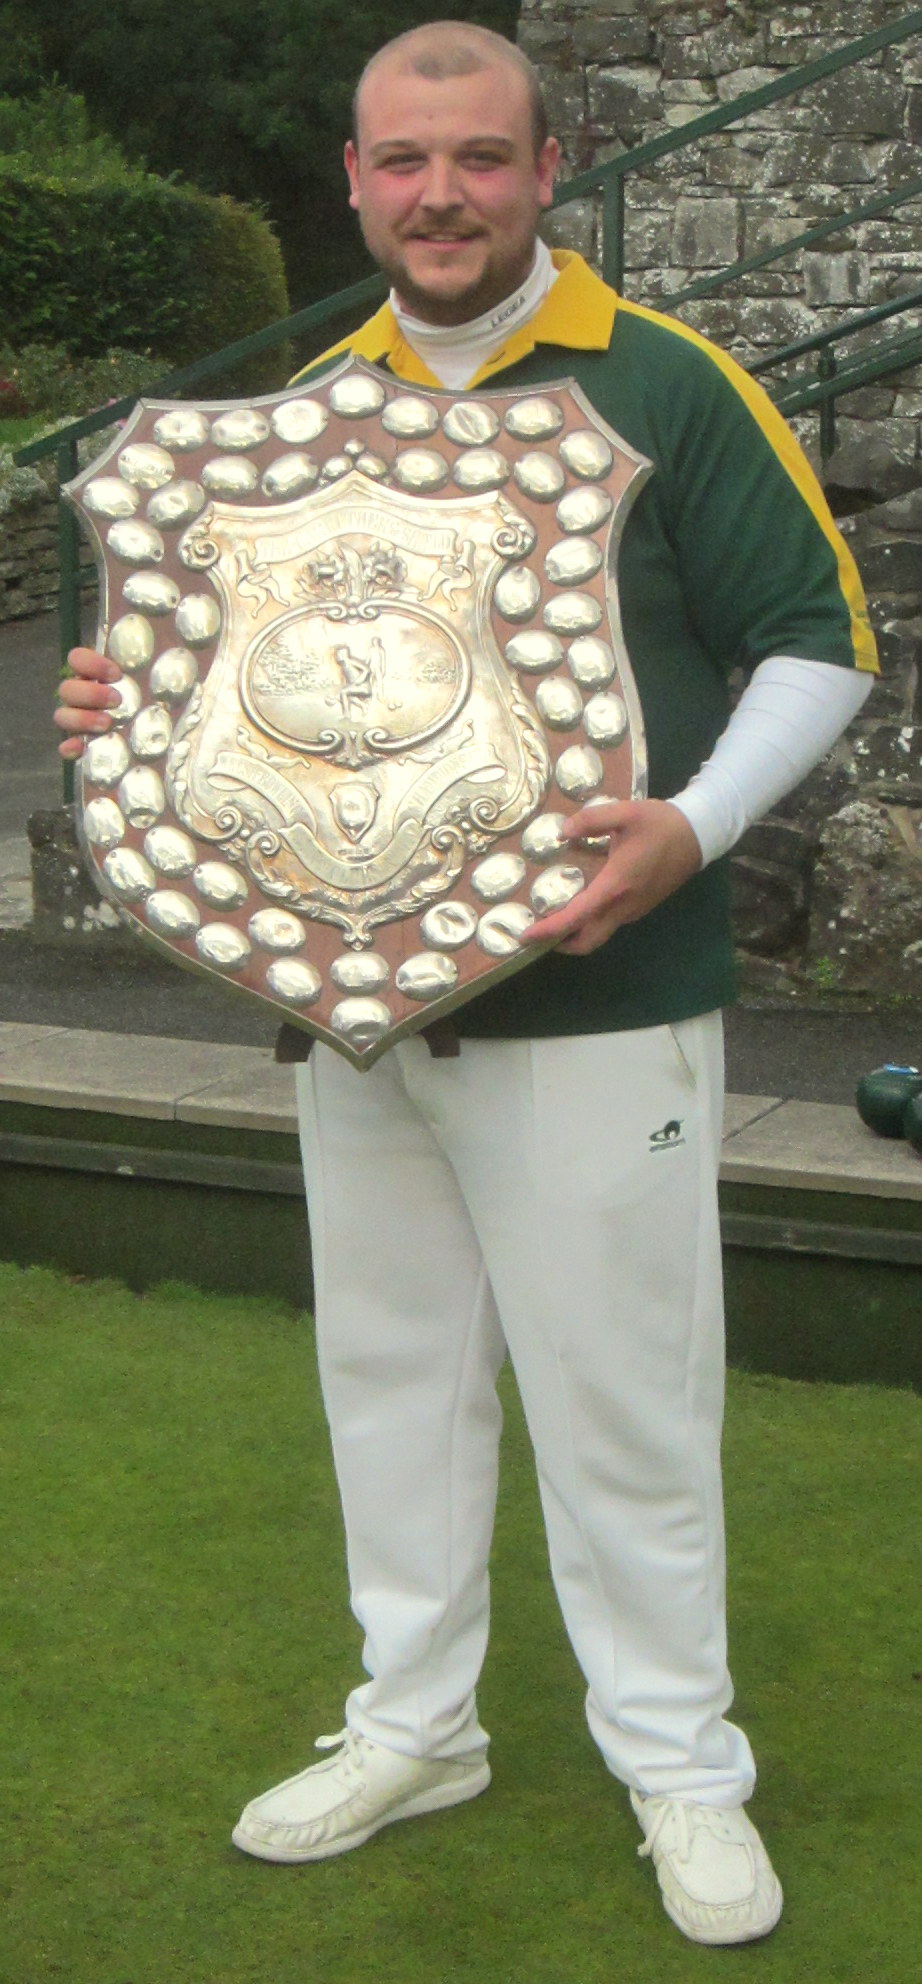 a person with a large metal trophy and posing for a po